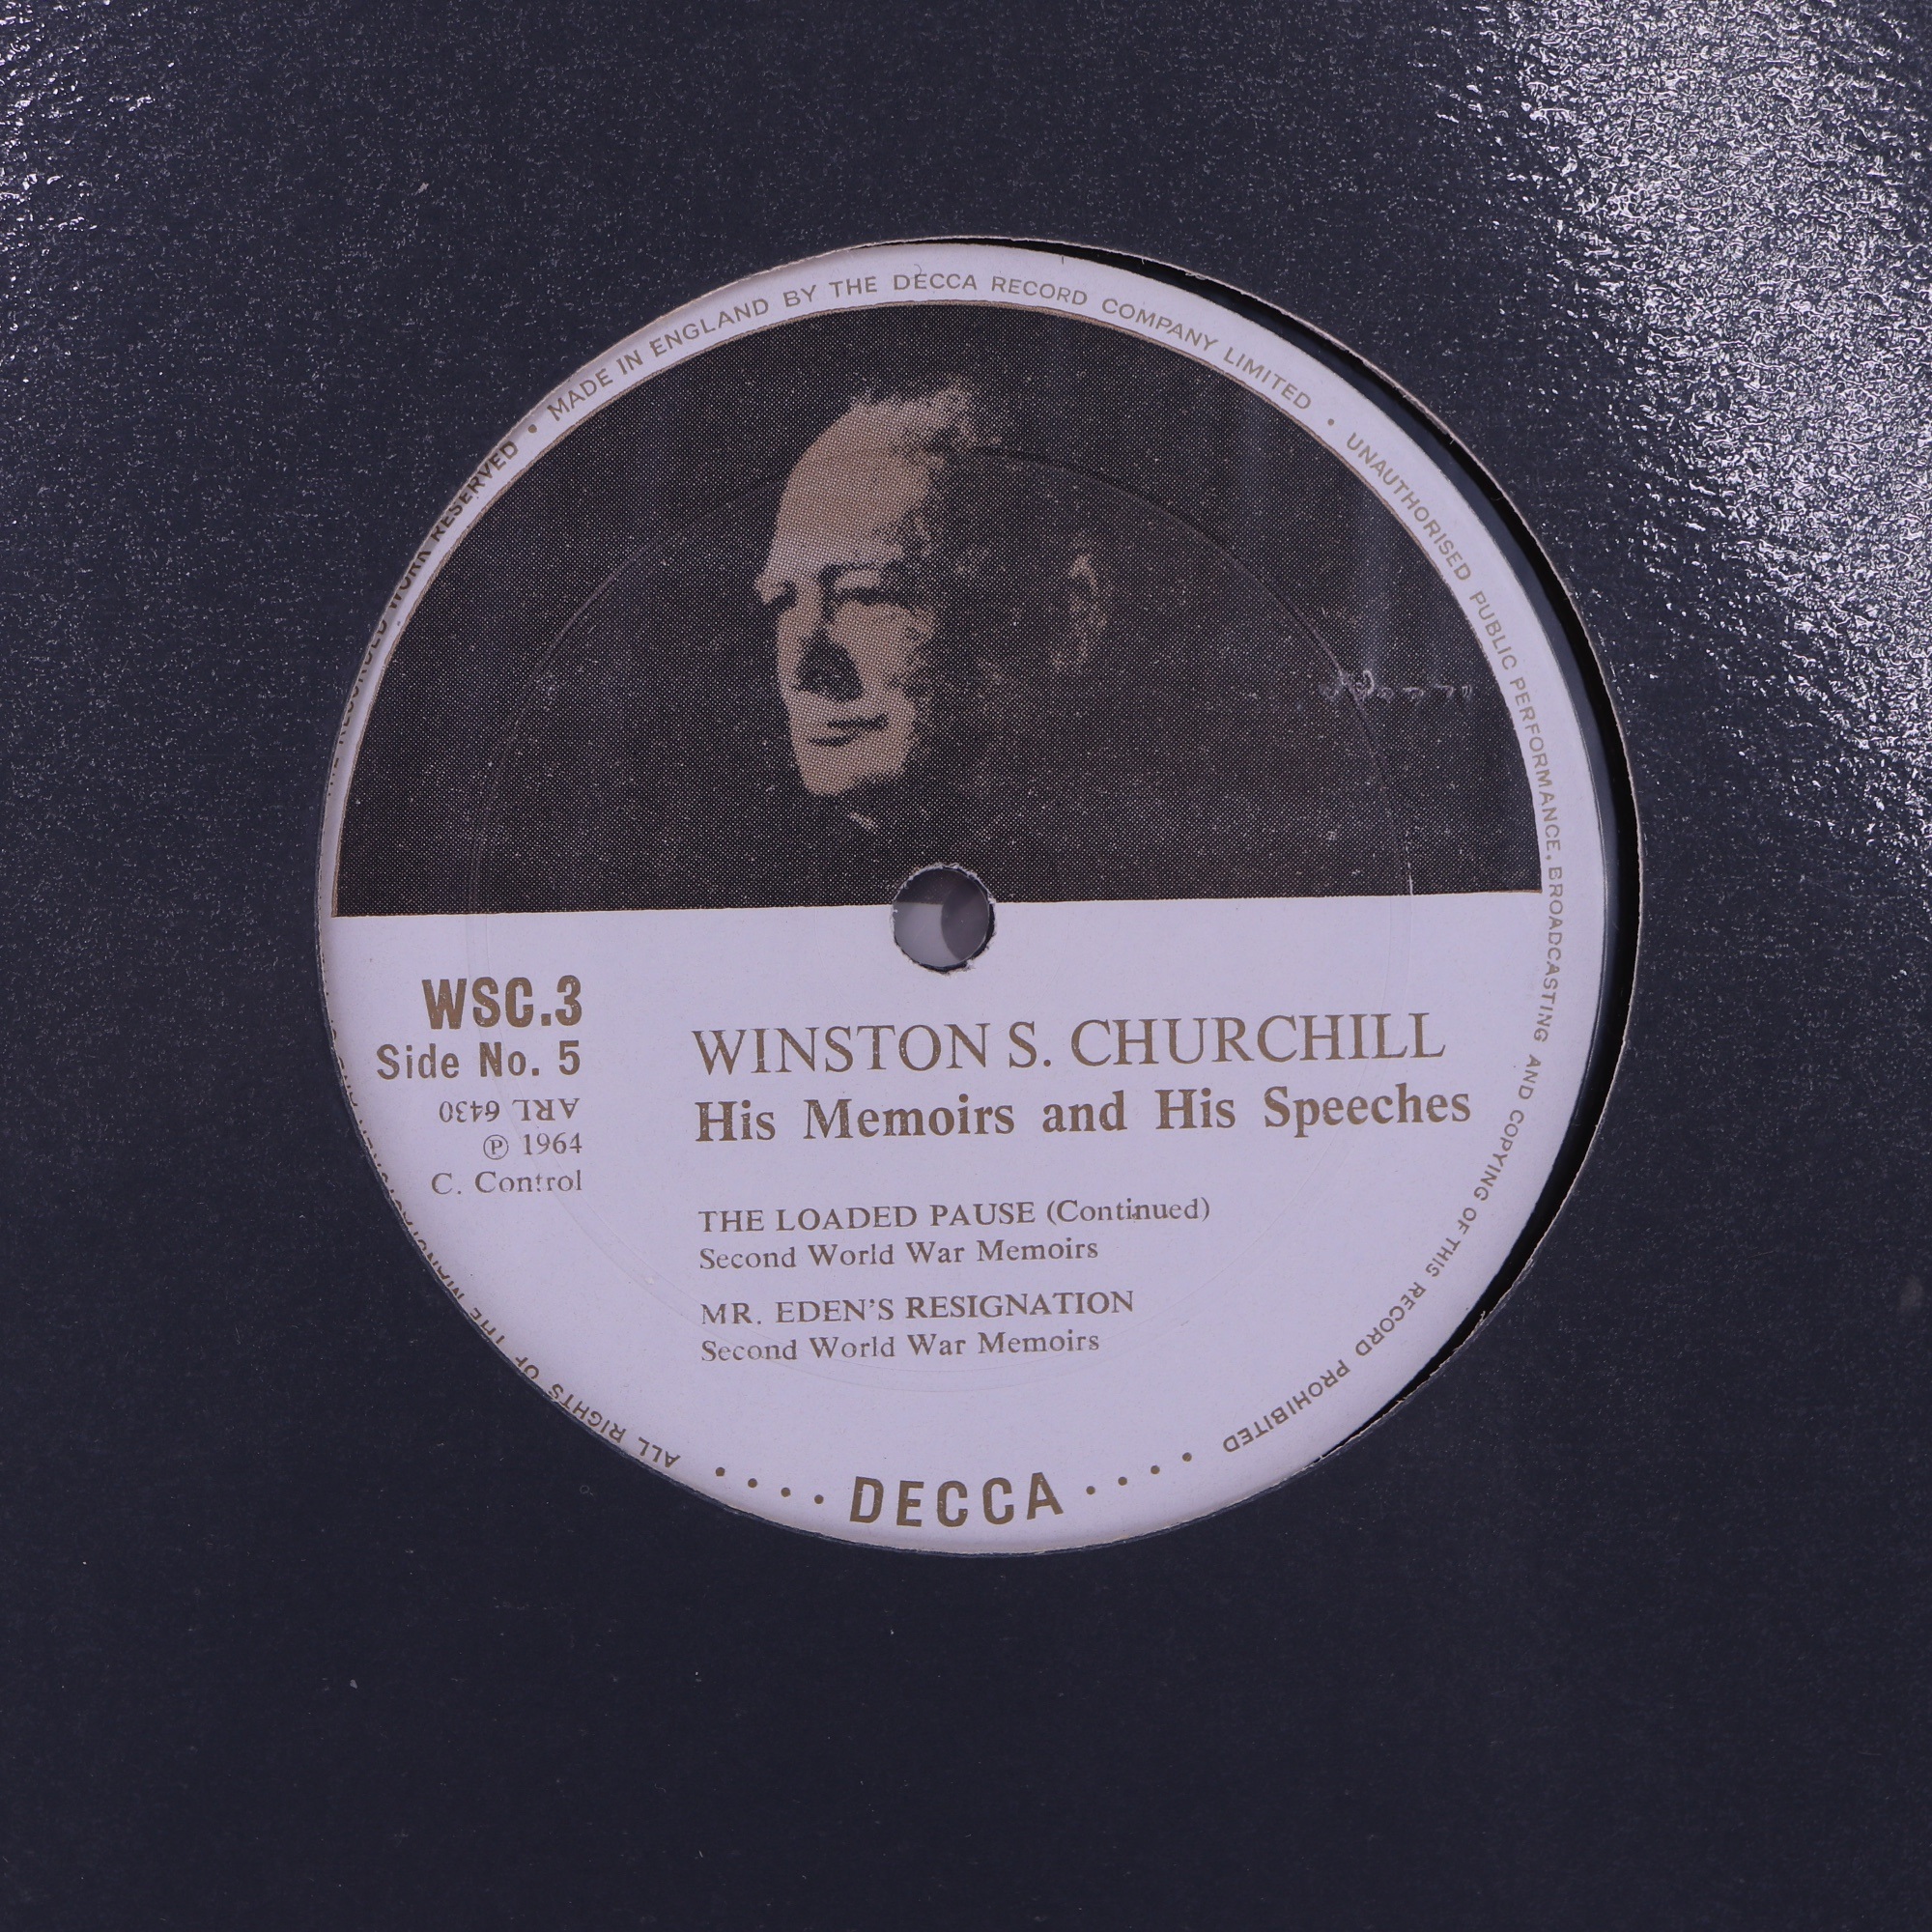 A 12-disc set of "Winston S Churchill, His Memoirs and His Speeches" 33 rpm vinyl records, Decca, - Image 4 of 13